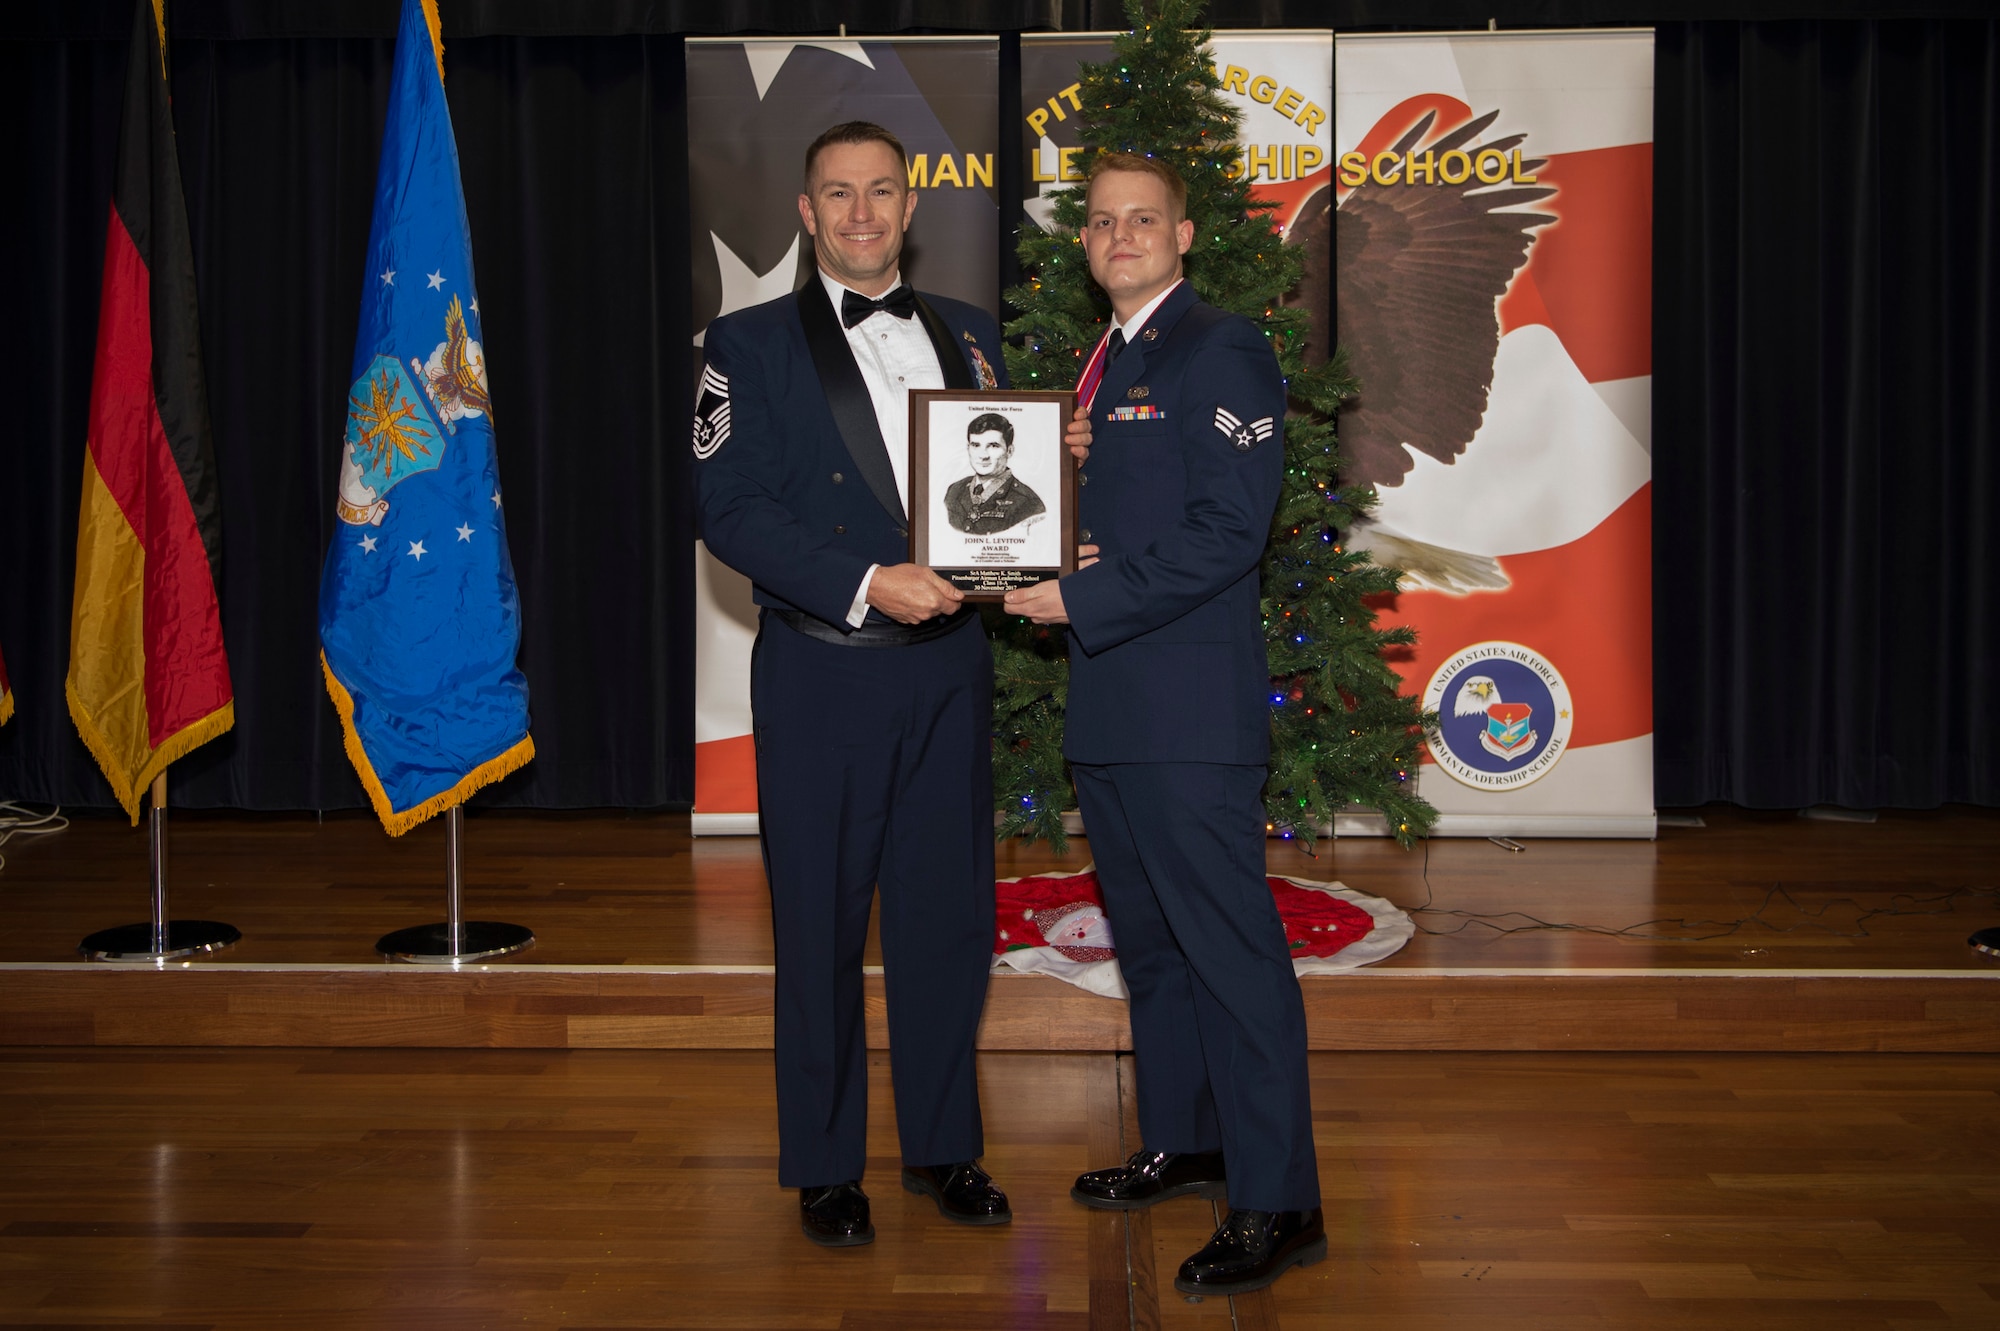 U.S. Air Force Senior Airman Matthew Smith, 52nd Communications Squadron mission defense team technician, receives the John L. Levitow during the Pitsenbarger Airman Leadership School 18-A graduation at Club Eifel on Spangdahlem Air Base, Germany, November 30,2017. The Levitow award is the highest honor given to the student who displays excellence in all categories of ALS. (U.S. Air Force photo by Senior Airman Dawn M. Weber)